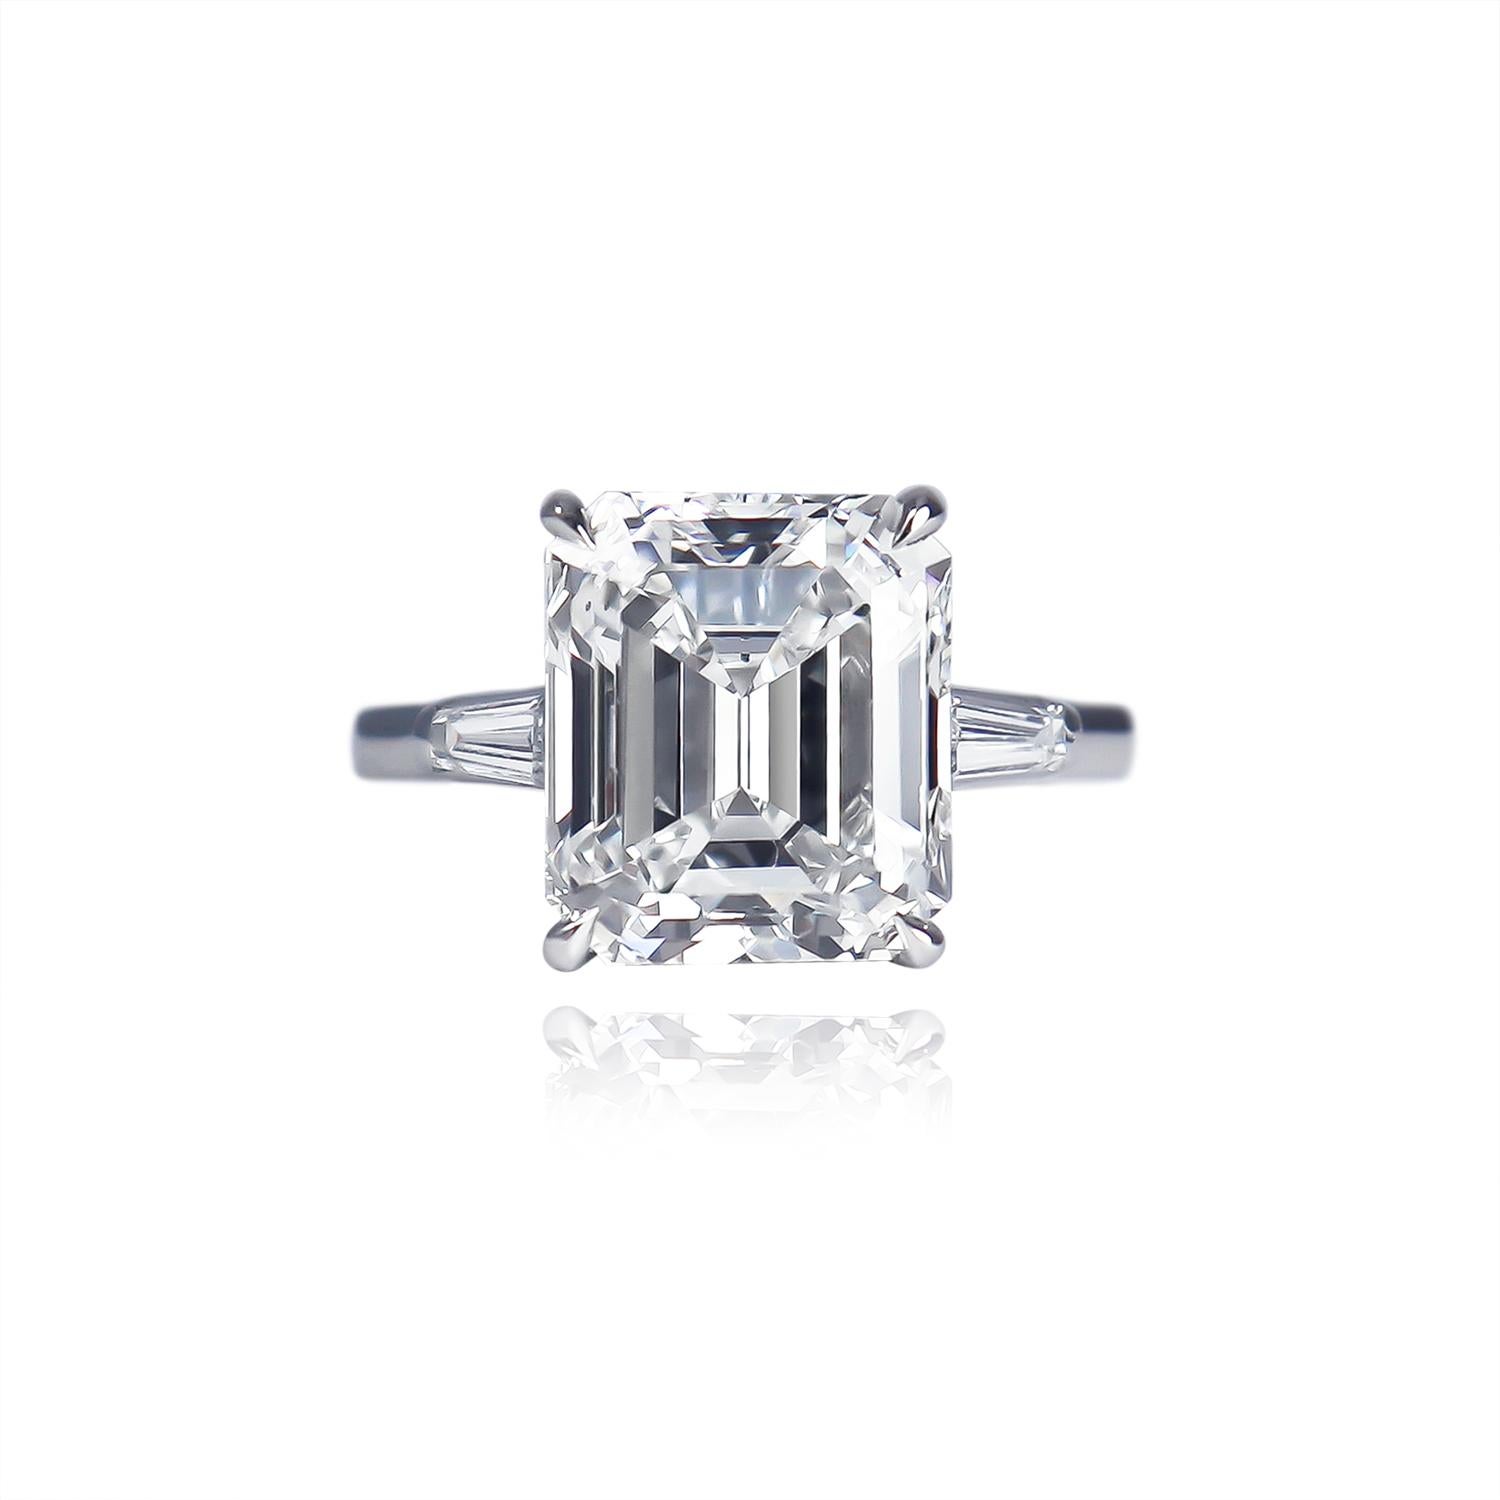 This breathtaking, platinum, Tiffany & Co. ring features a GIA certified 5.25 carat emerald cut diamond of E color and VS2 clarity. Set in a signed ring with tapered baguettes = approximately 0.40 carat total weight, this piece is a contemporary